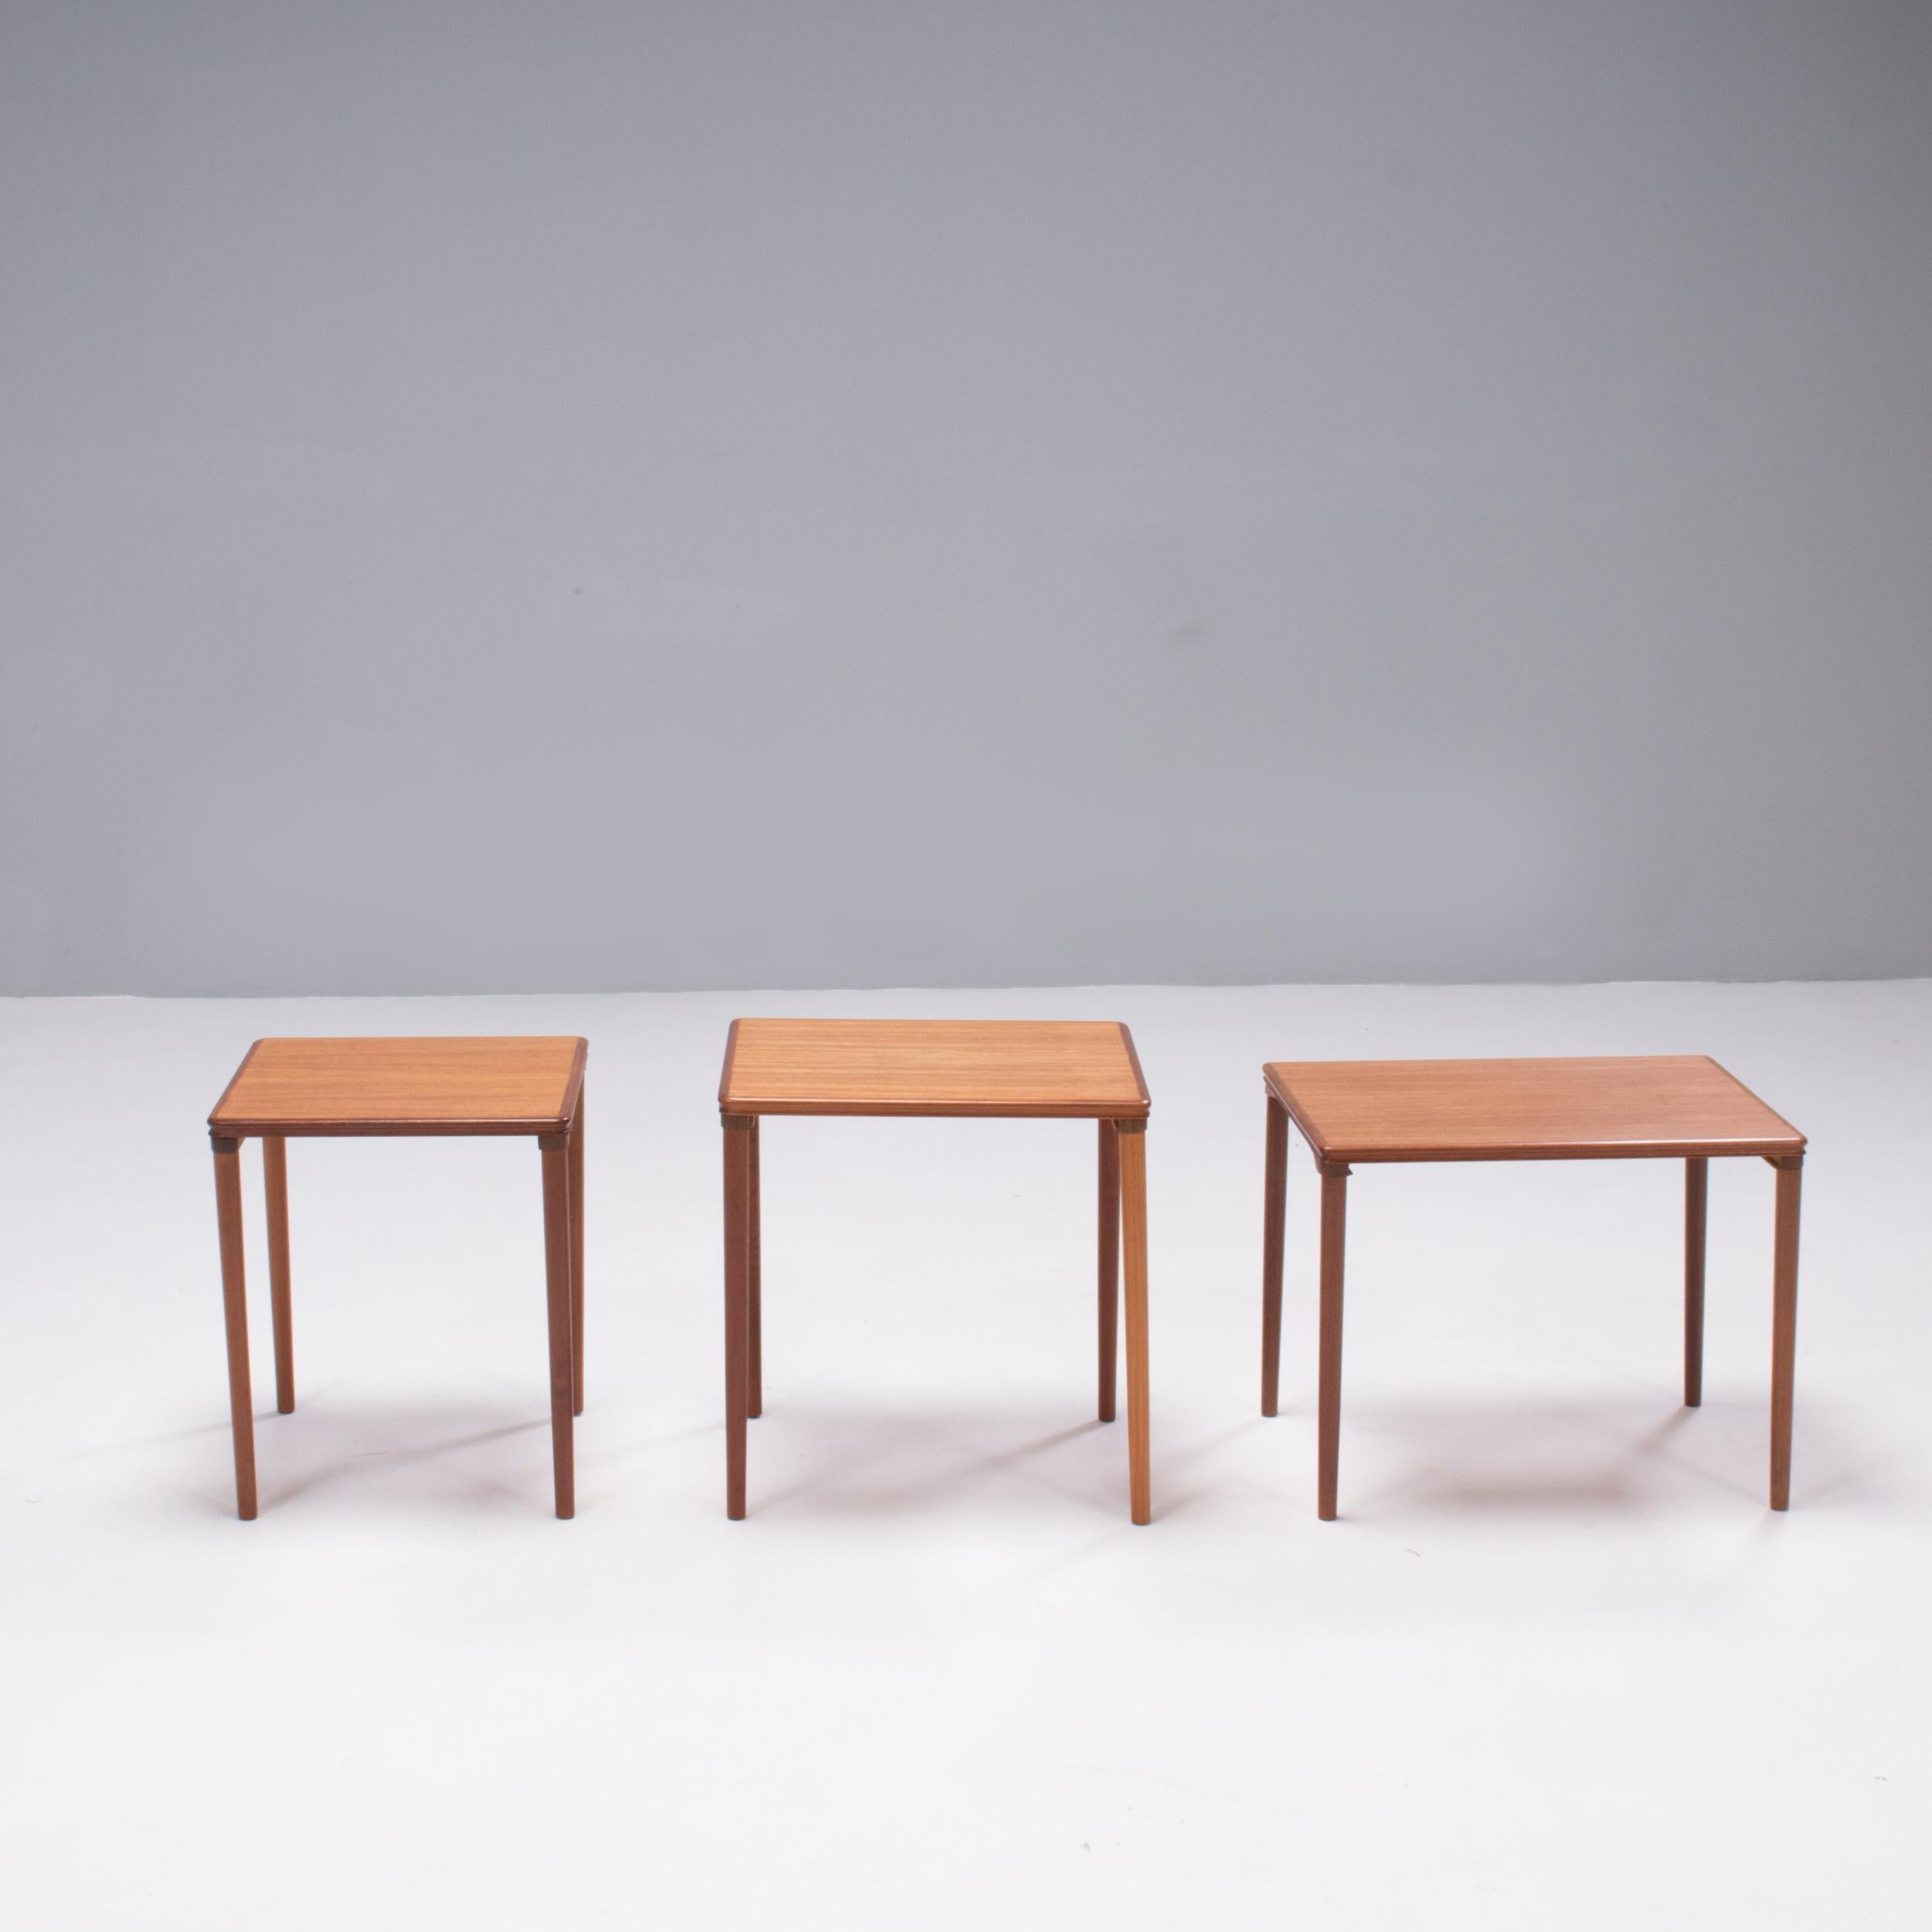 Designed by E. W. Bach and manufactured by Toften, this set of nesting tables is a fantastic example of 1960s Danish design.

Constructed from teak wood are a versatile and space saving piece that can be used in a multitude of ways.

The perfect